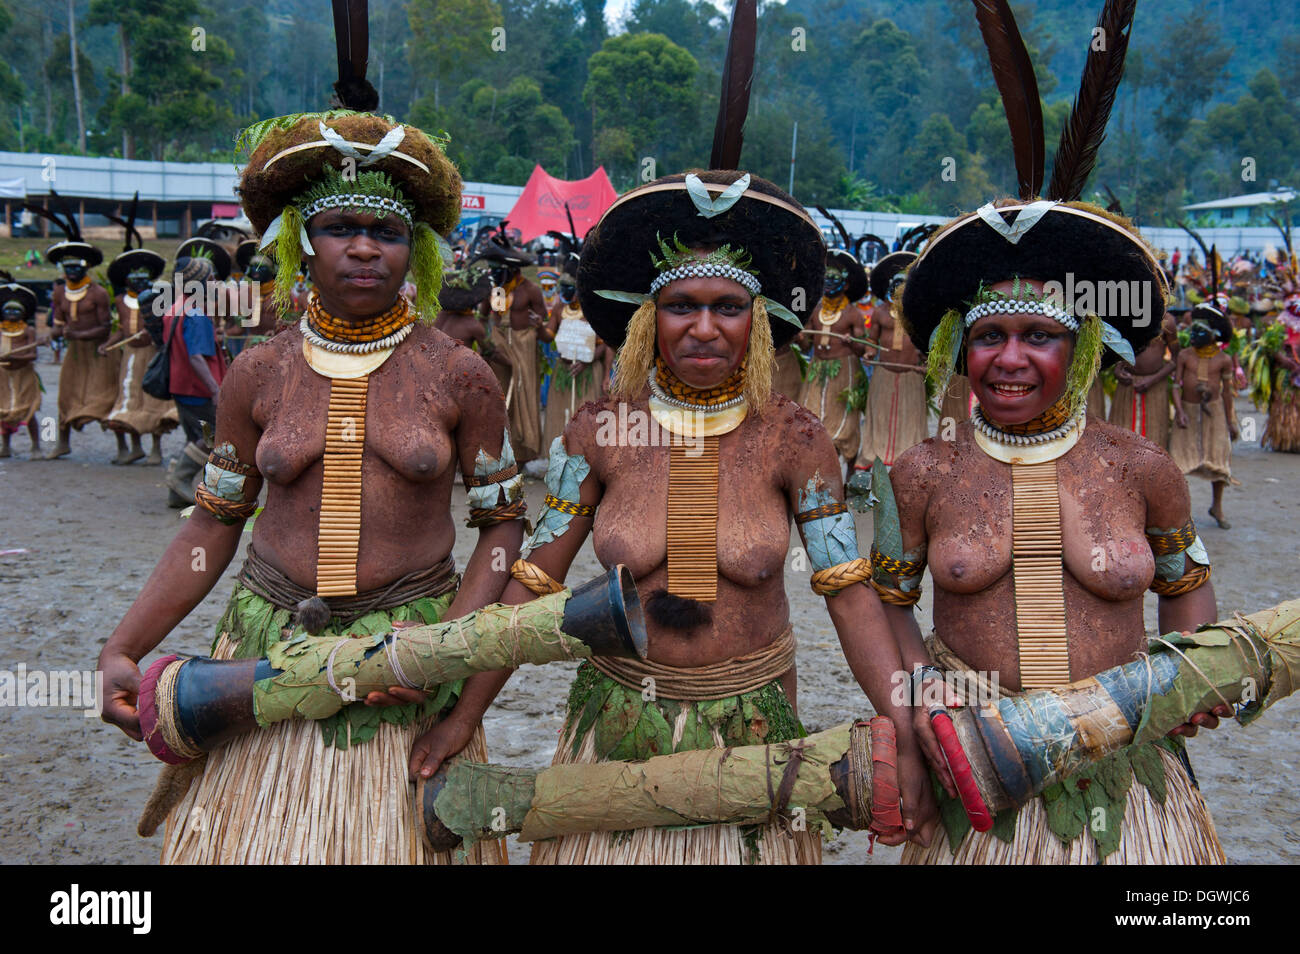 Decorated and painted women celebrating the traditional Sing Sing in the highlands, Enga, Highlands, Papua New Guinea Stock Photo